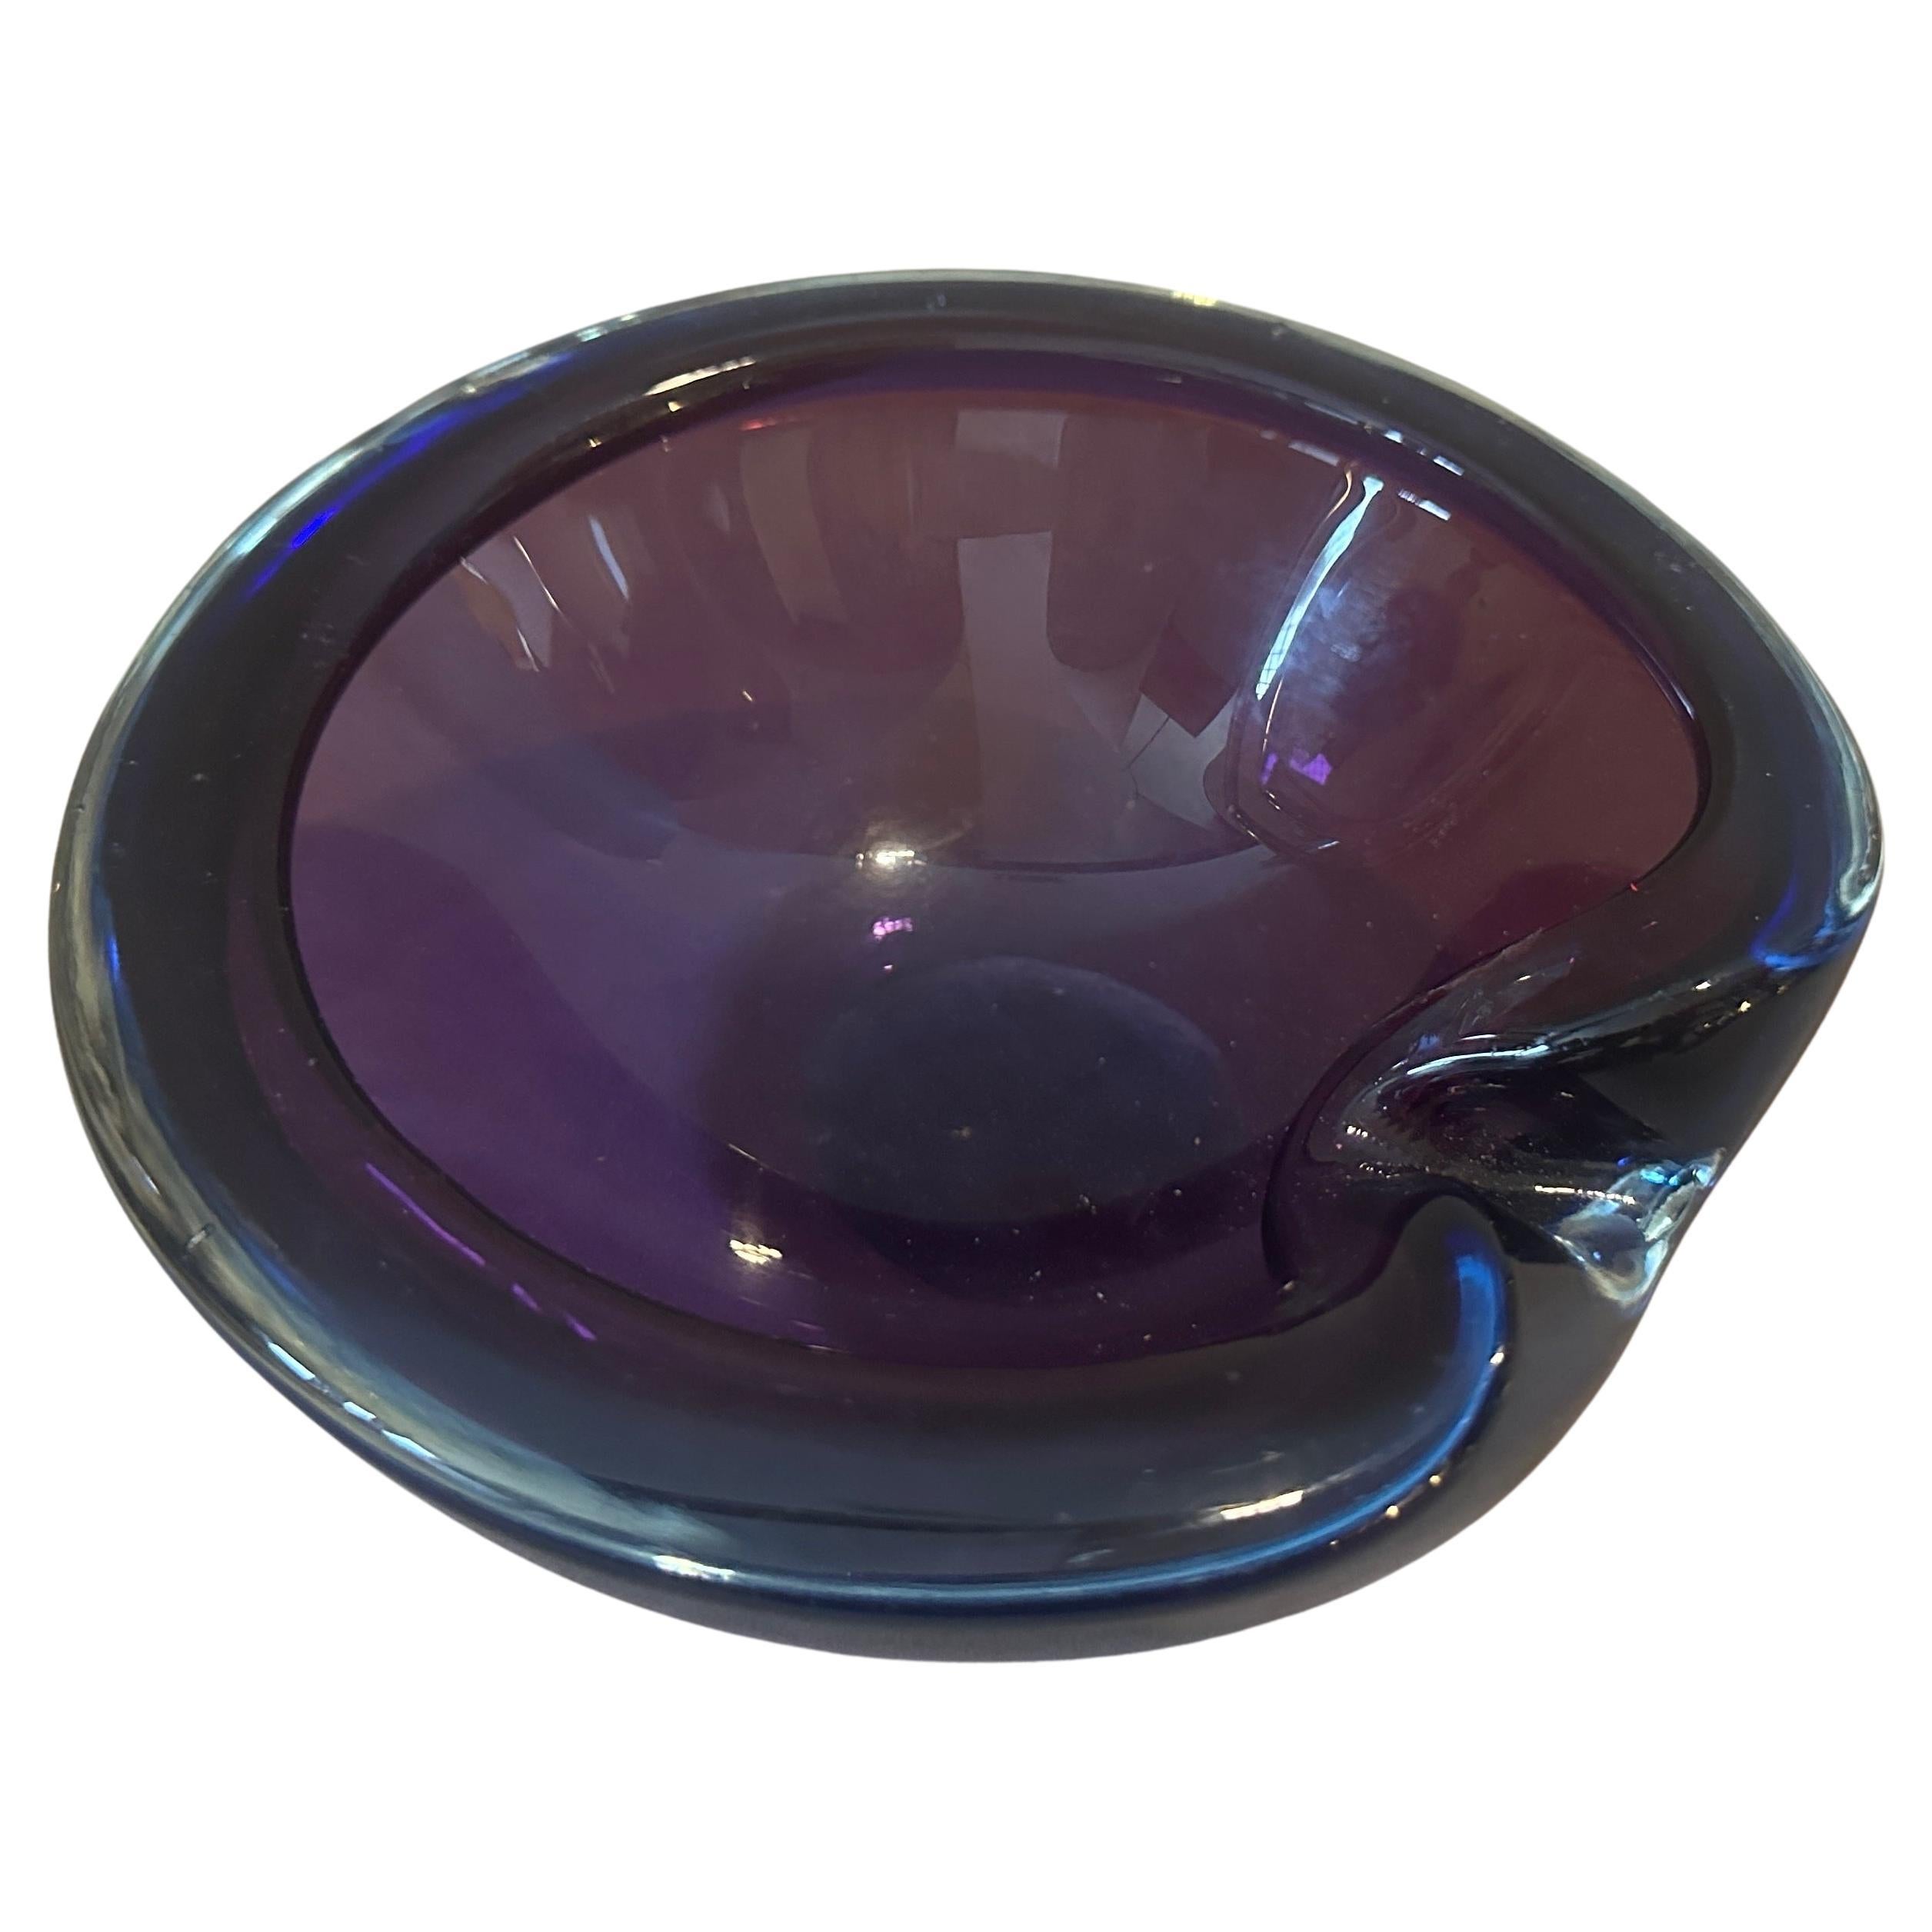 1970s Modernist Blue and Purple Murano Glass Bowl by Seguso For Sale